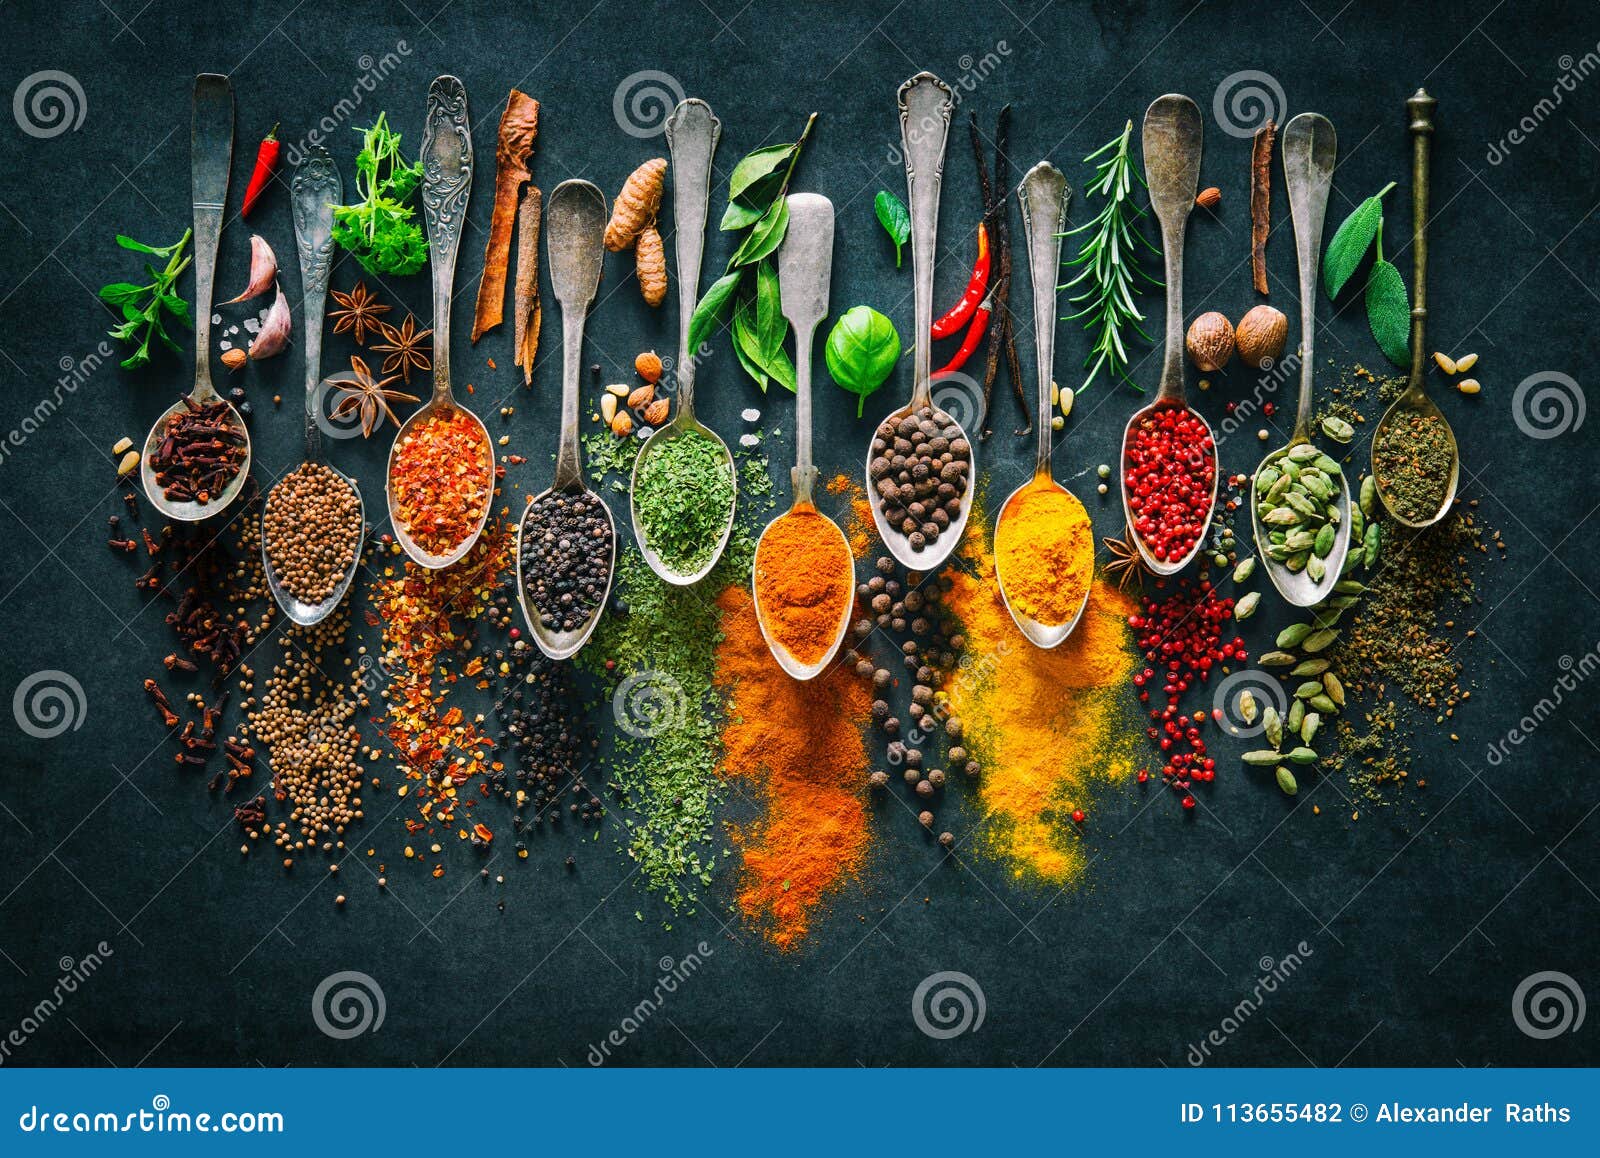 https://thumbs.dreamstime.com/z/colourful-various-herbs-spices-cooking-dark-background-herbs-spices-cooking-dark-background-113655482.jpg